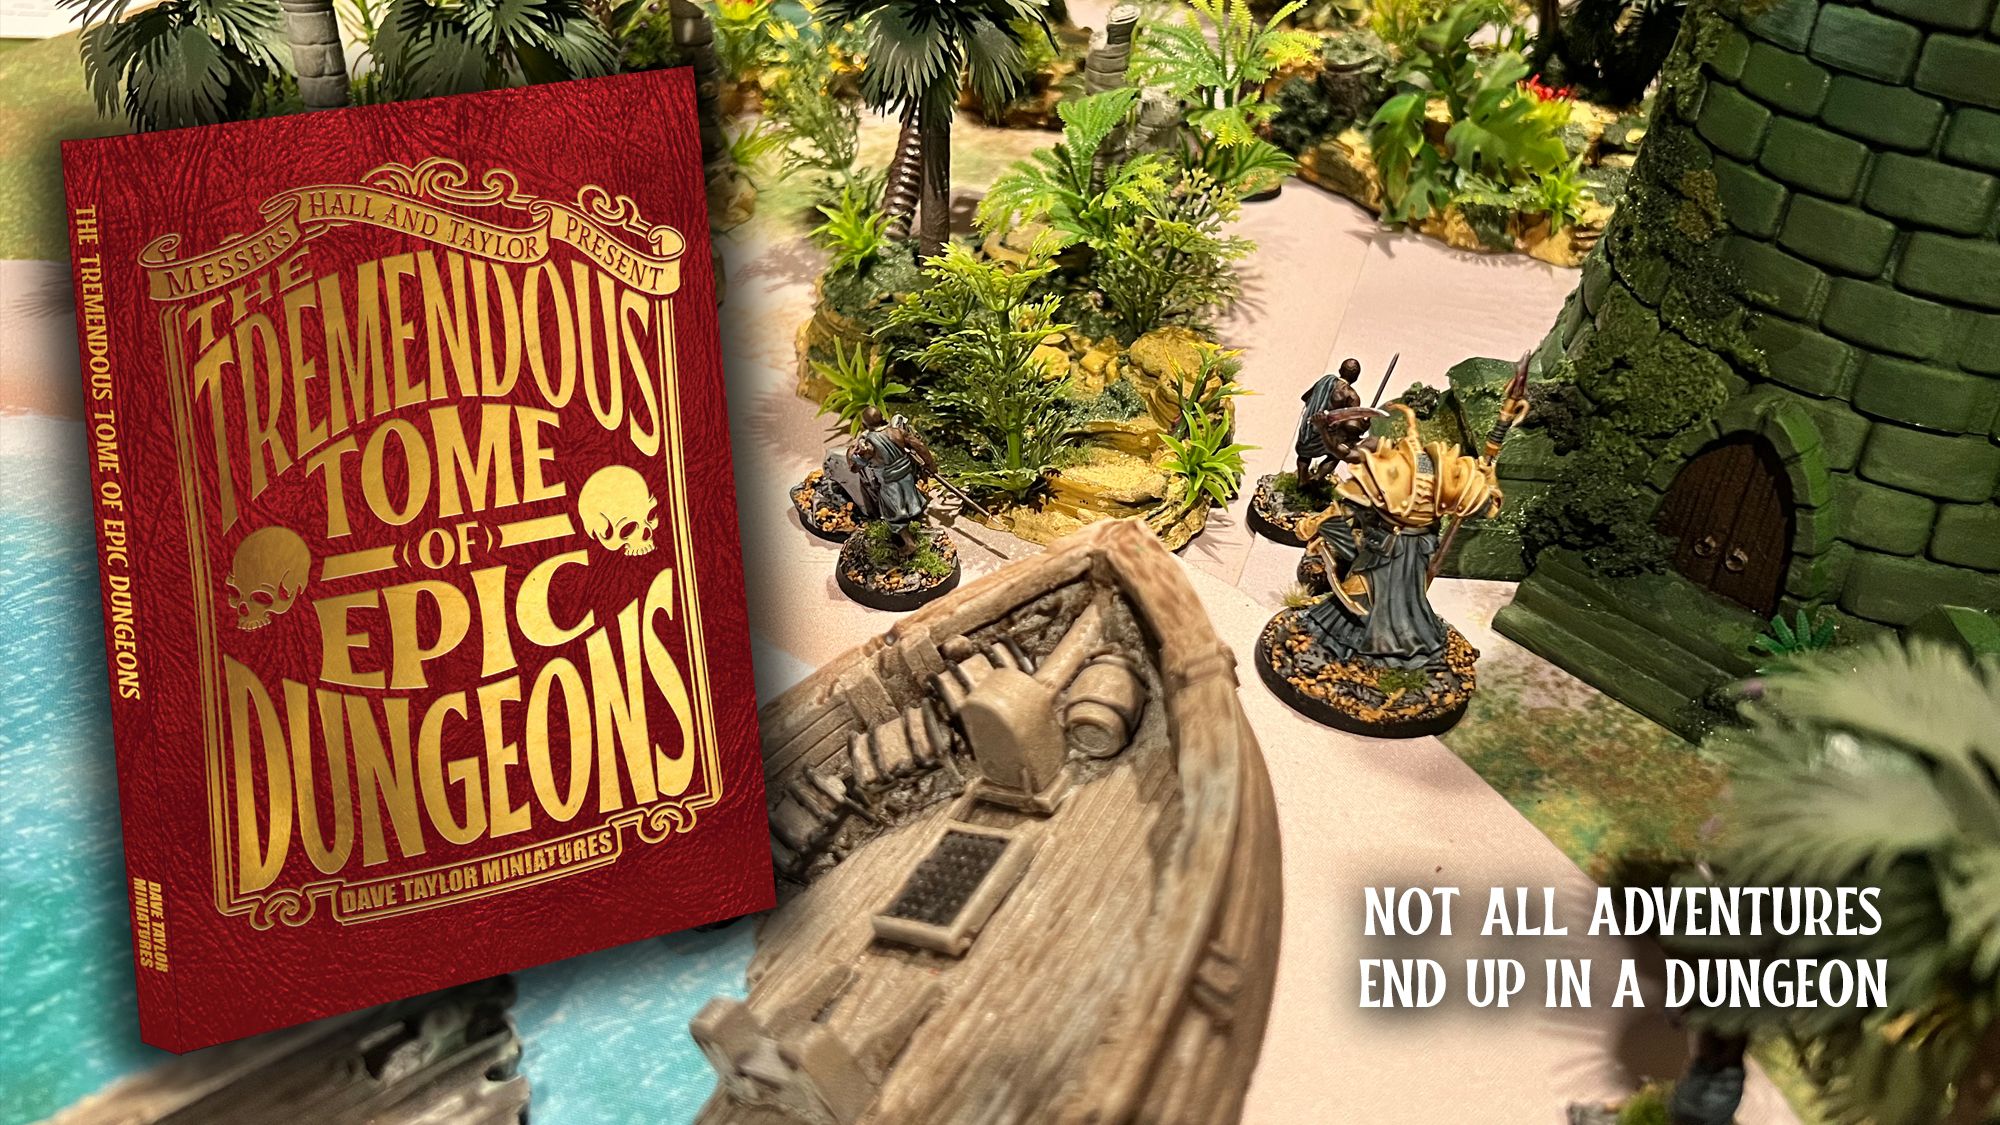 The Tremendous Tome Of Epic Dungeons #3 - Dave Taylor Miniatures